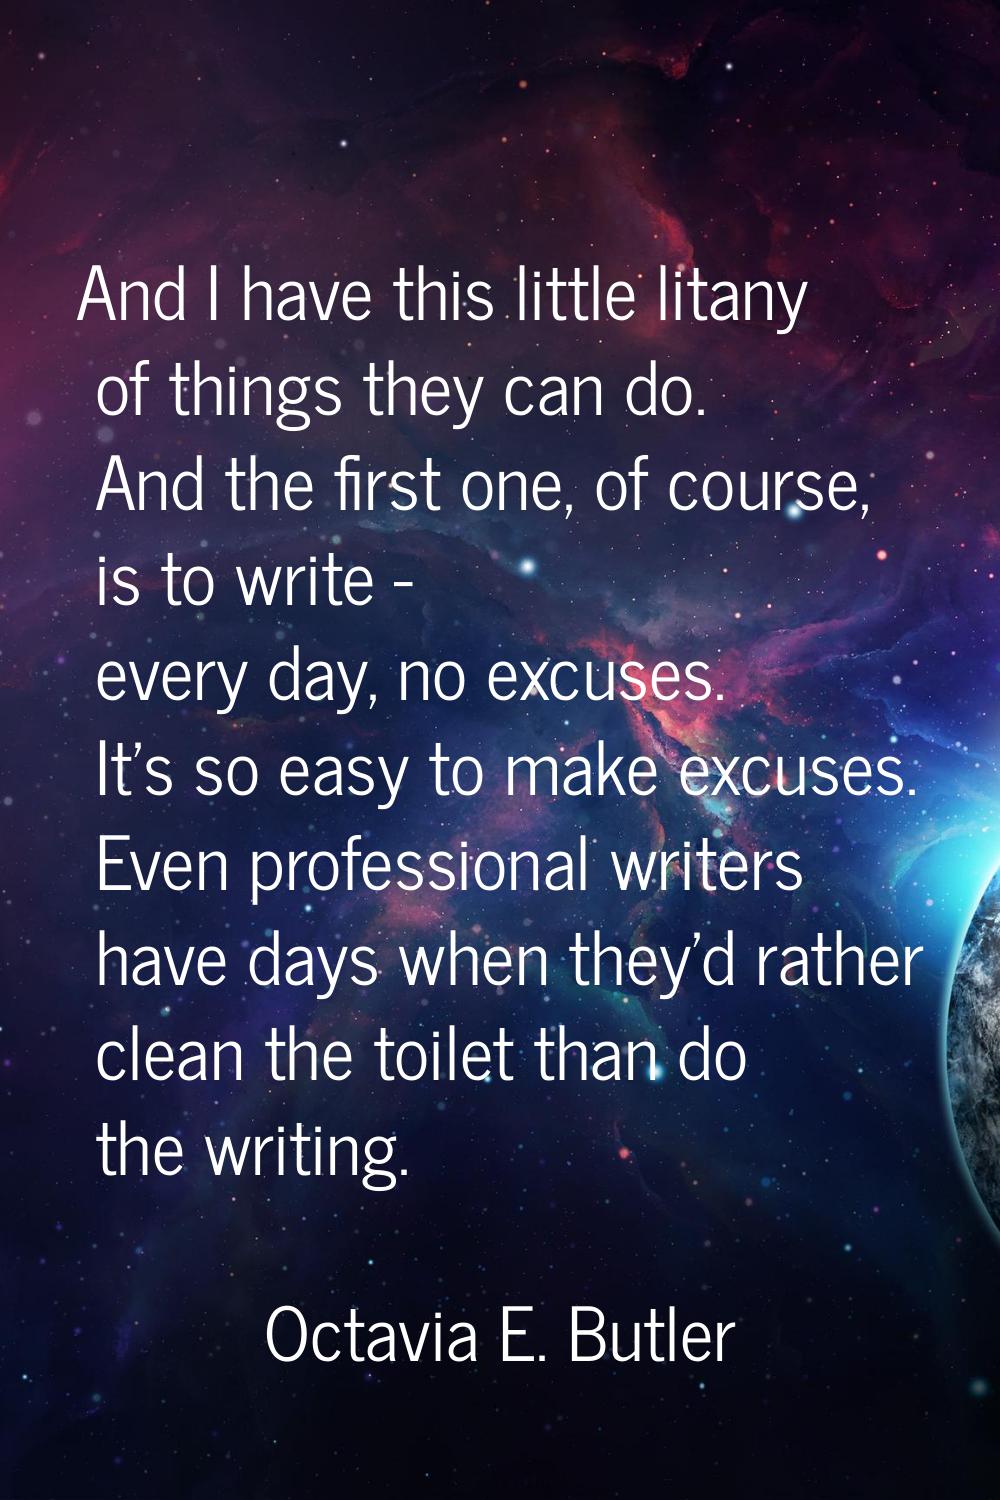 And I have this little litany of things they can do. And the first one, of course, is to write - ev